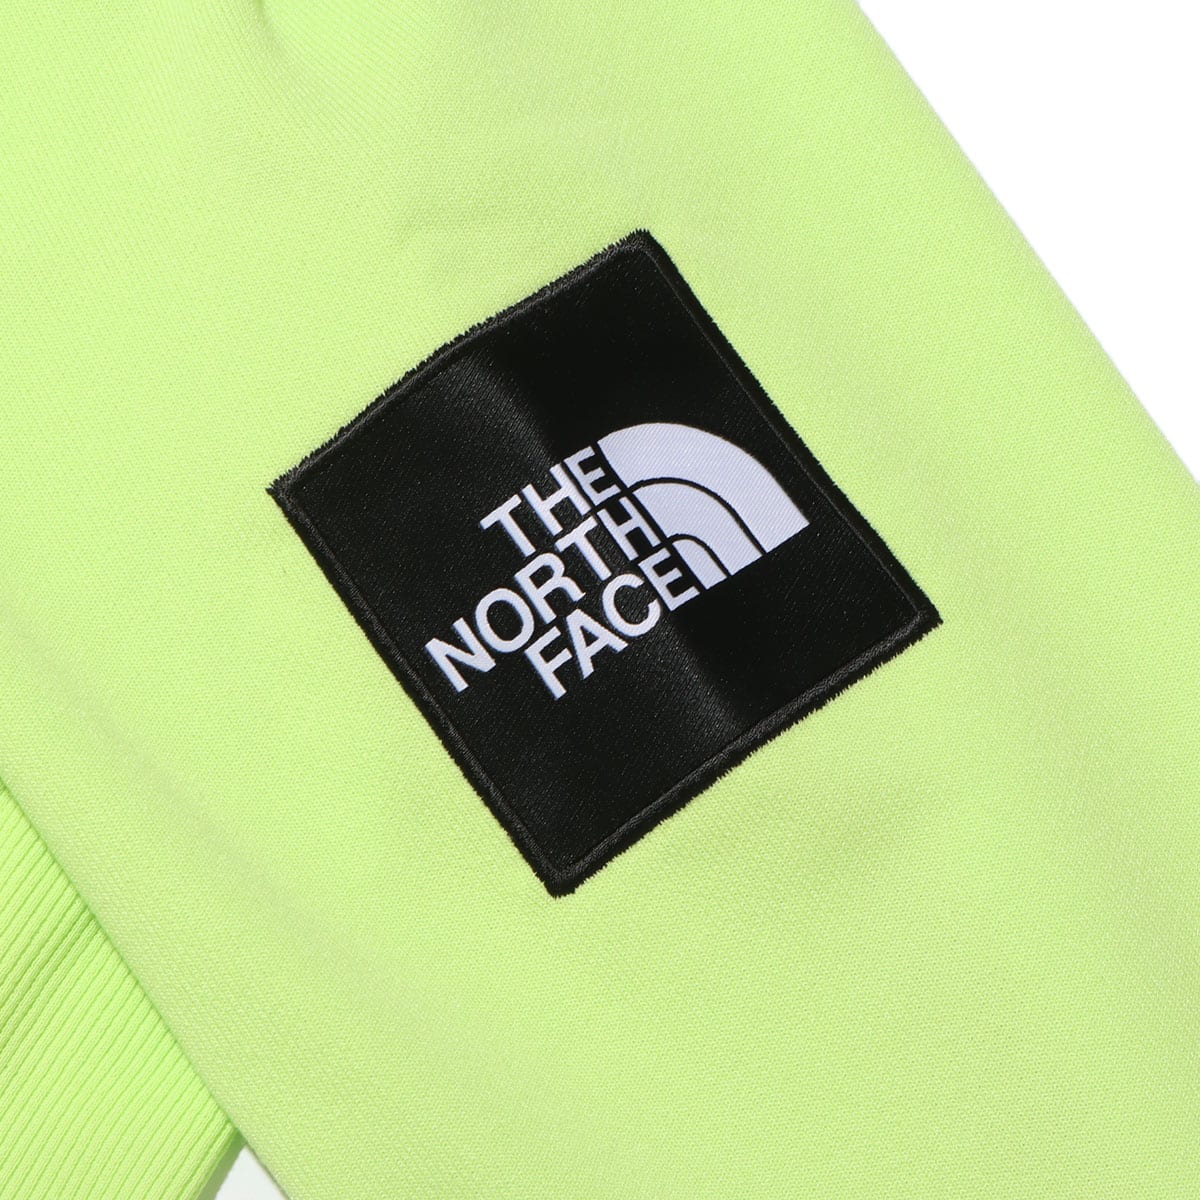 THE NORTH FACE SQUARE LOGO FULL ZIP シャープグリーン 22SS-I